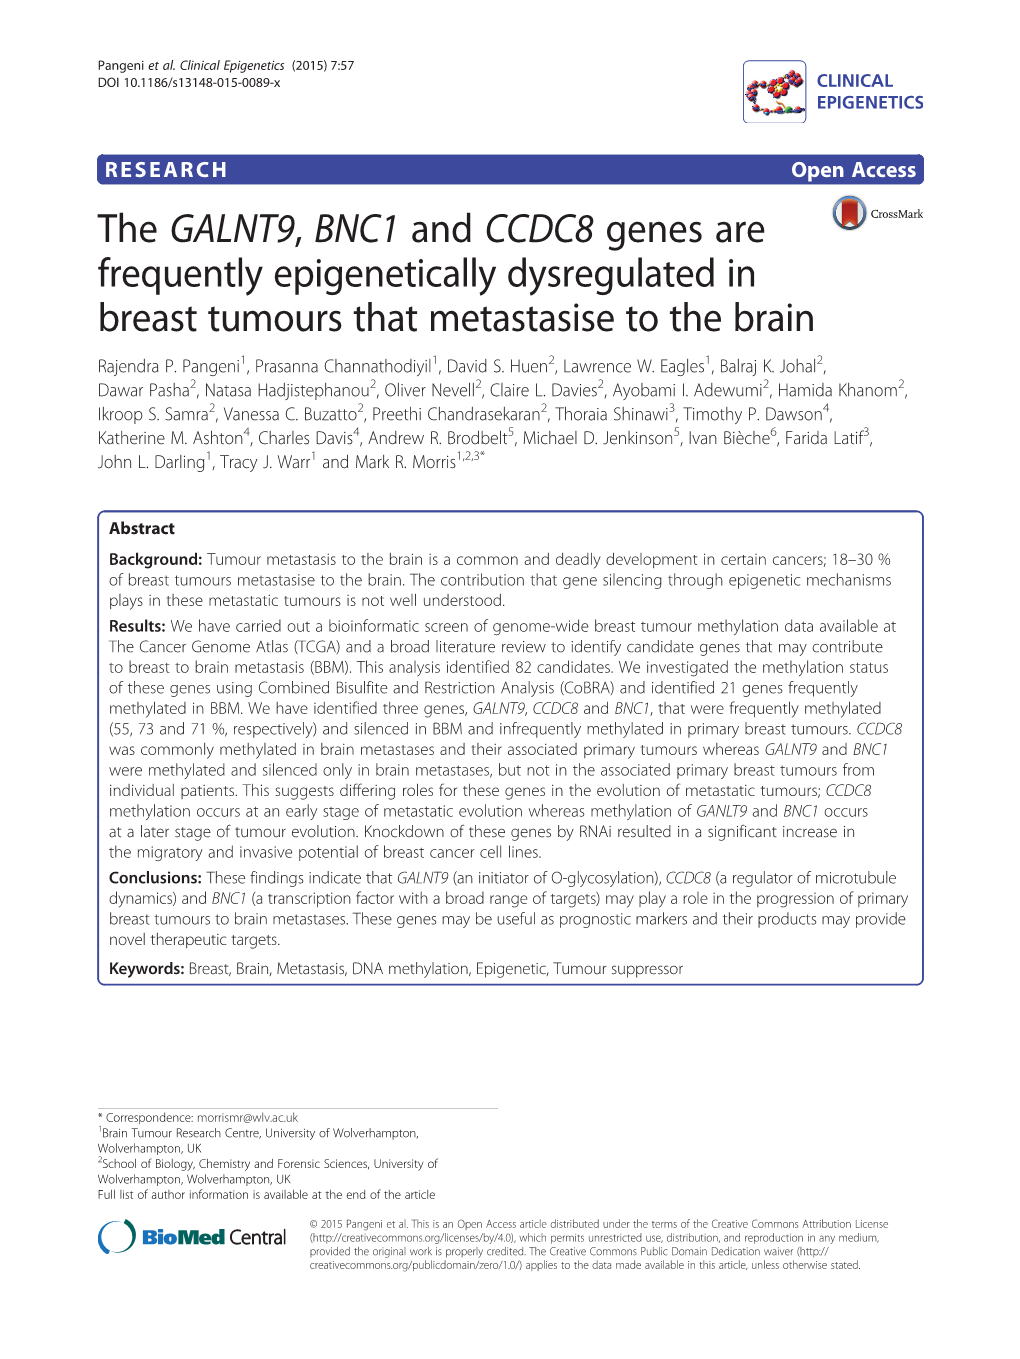 The GALNT9, BNC1 and CCDC8 Genes Are Frequently Epigenetically Dysregulated in Breast Tumours That Metastasise to the Brain Rajendra P